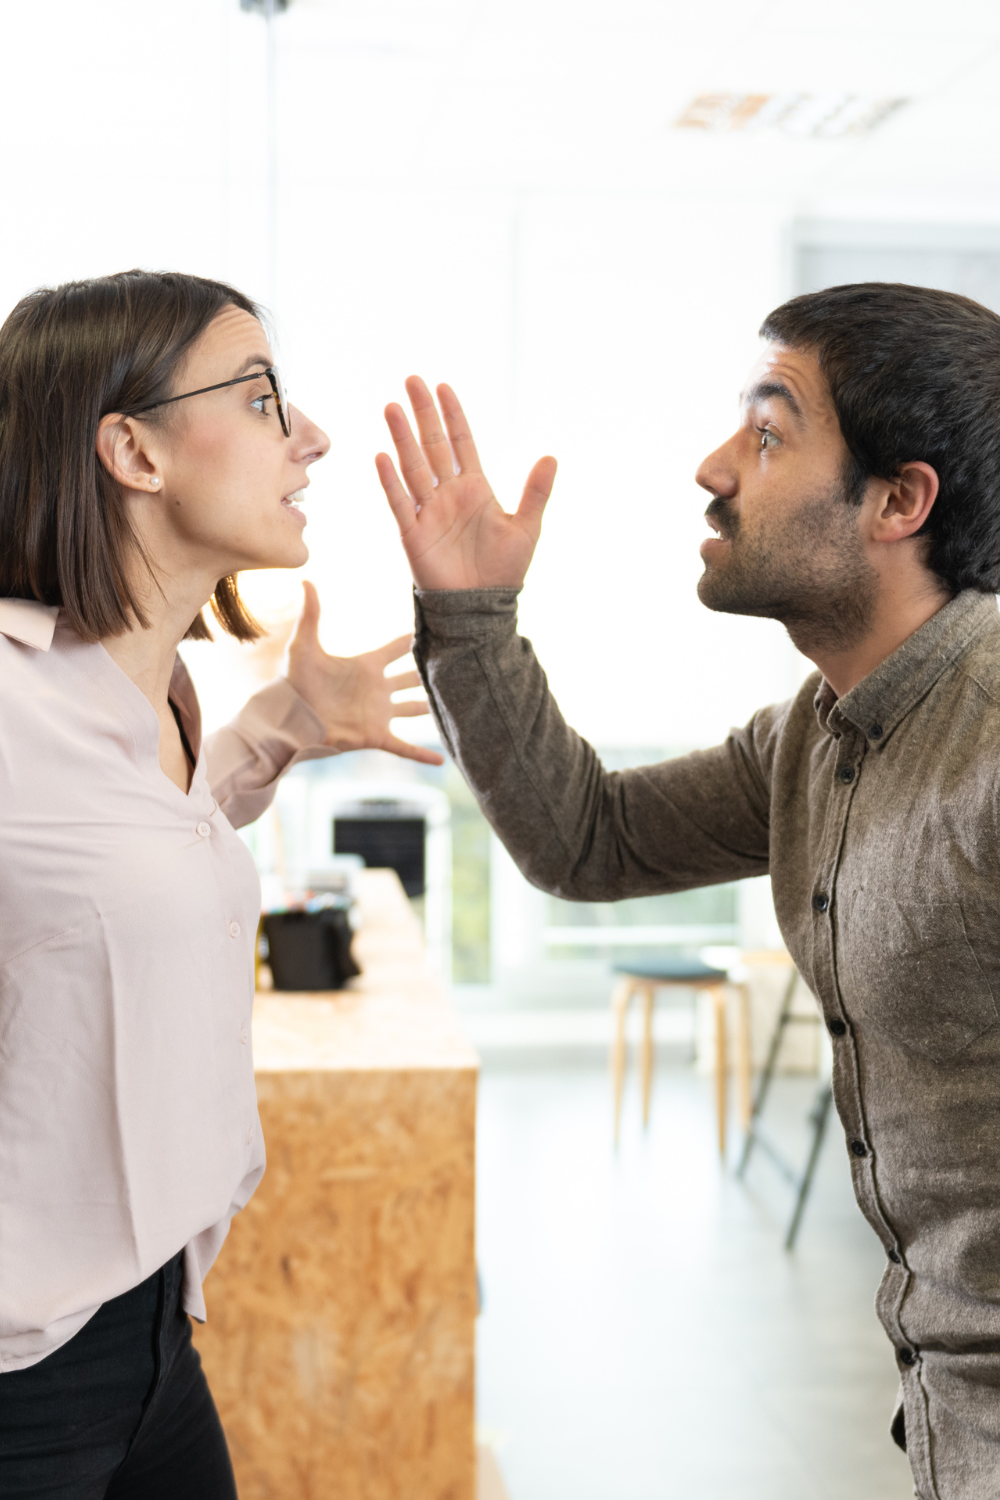  Signs Your Coworker is Threatened by You